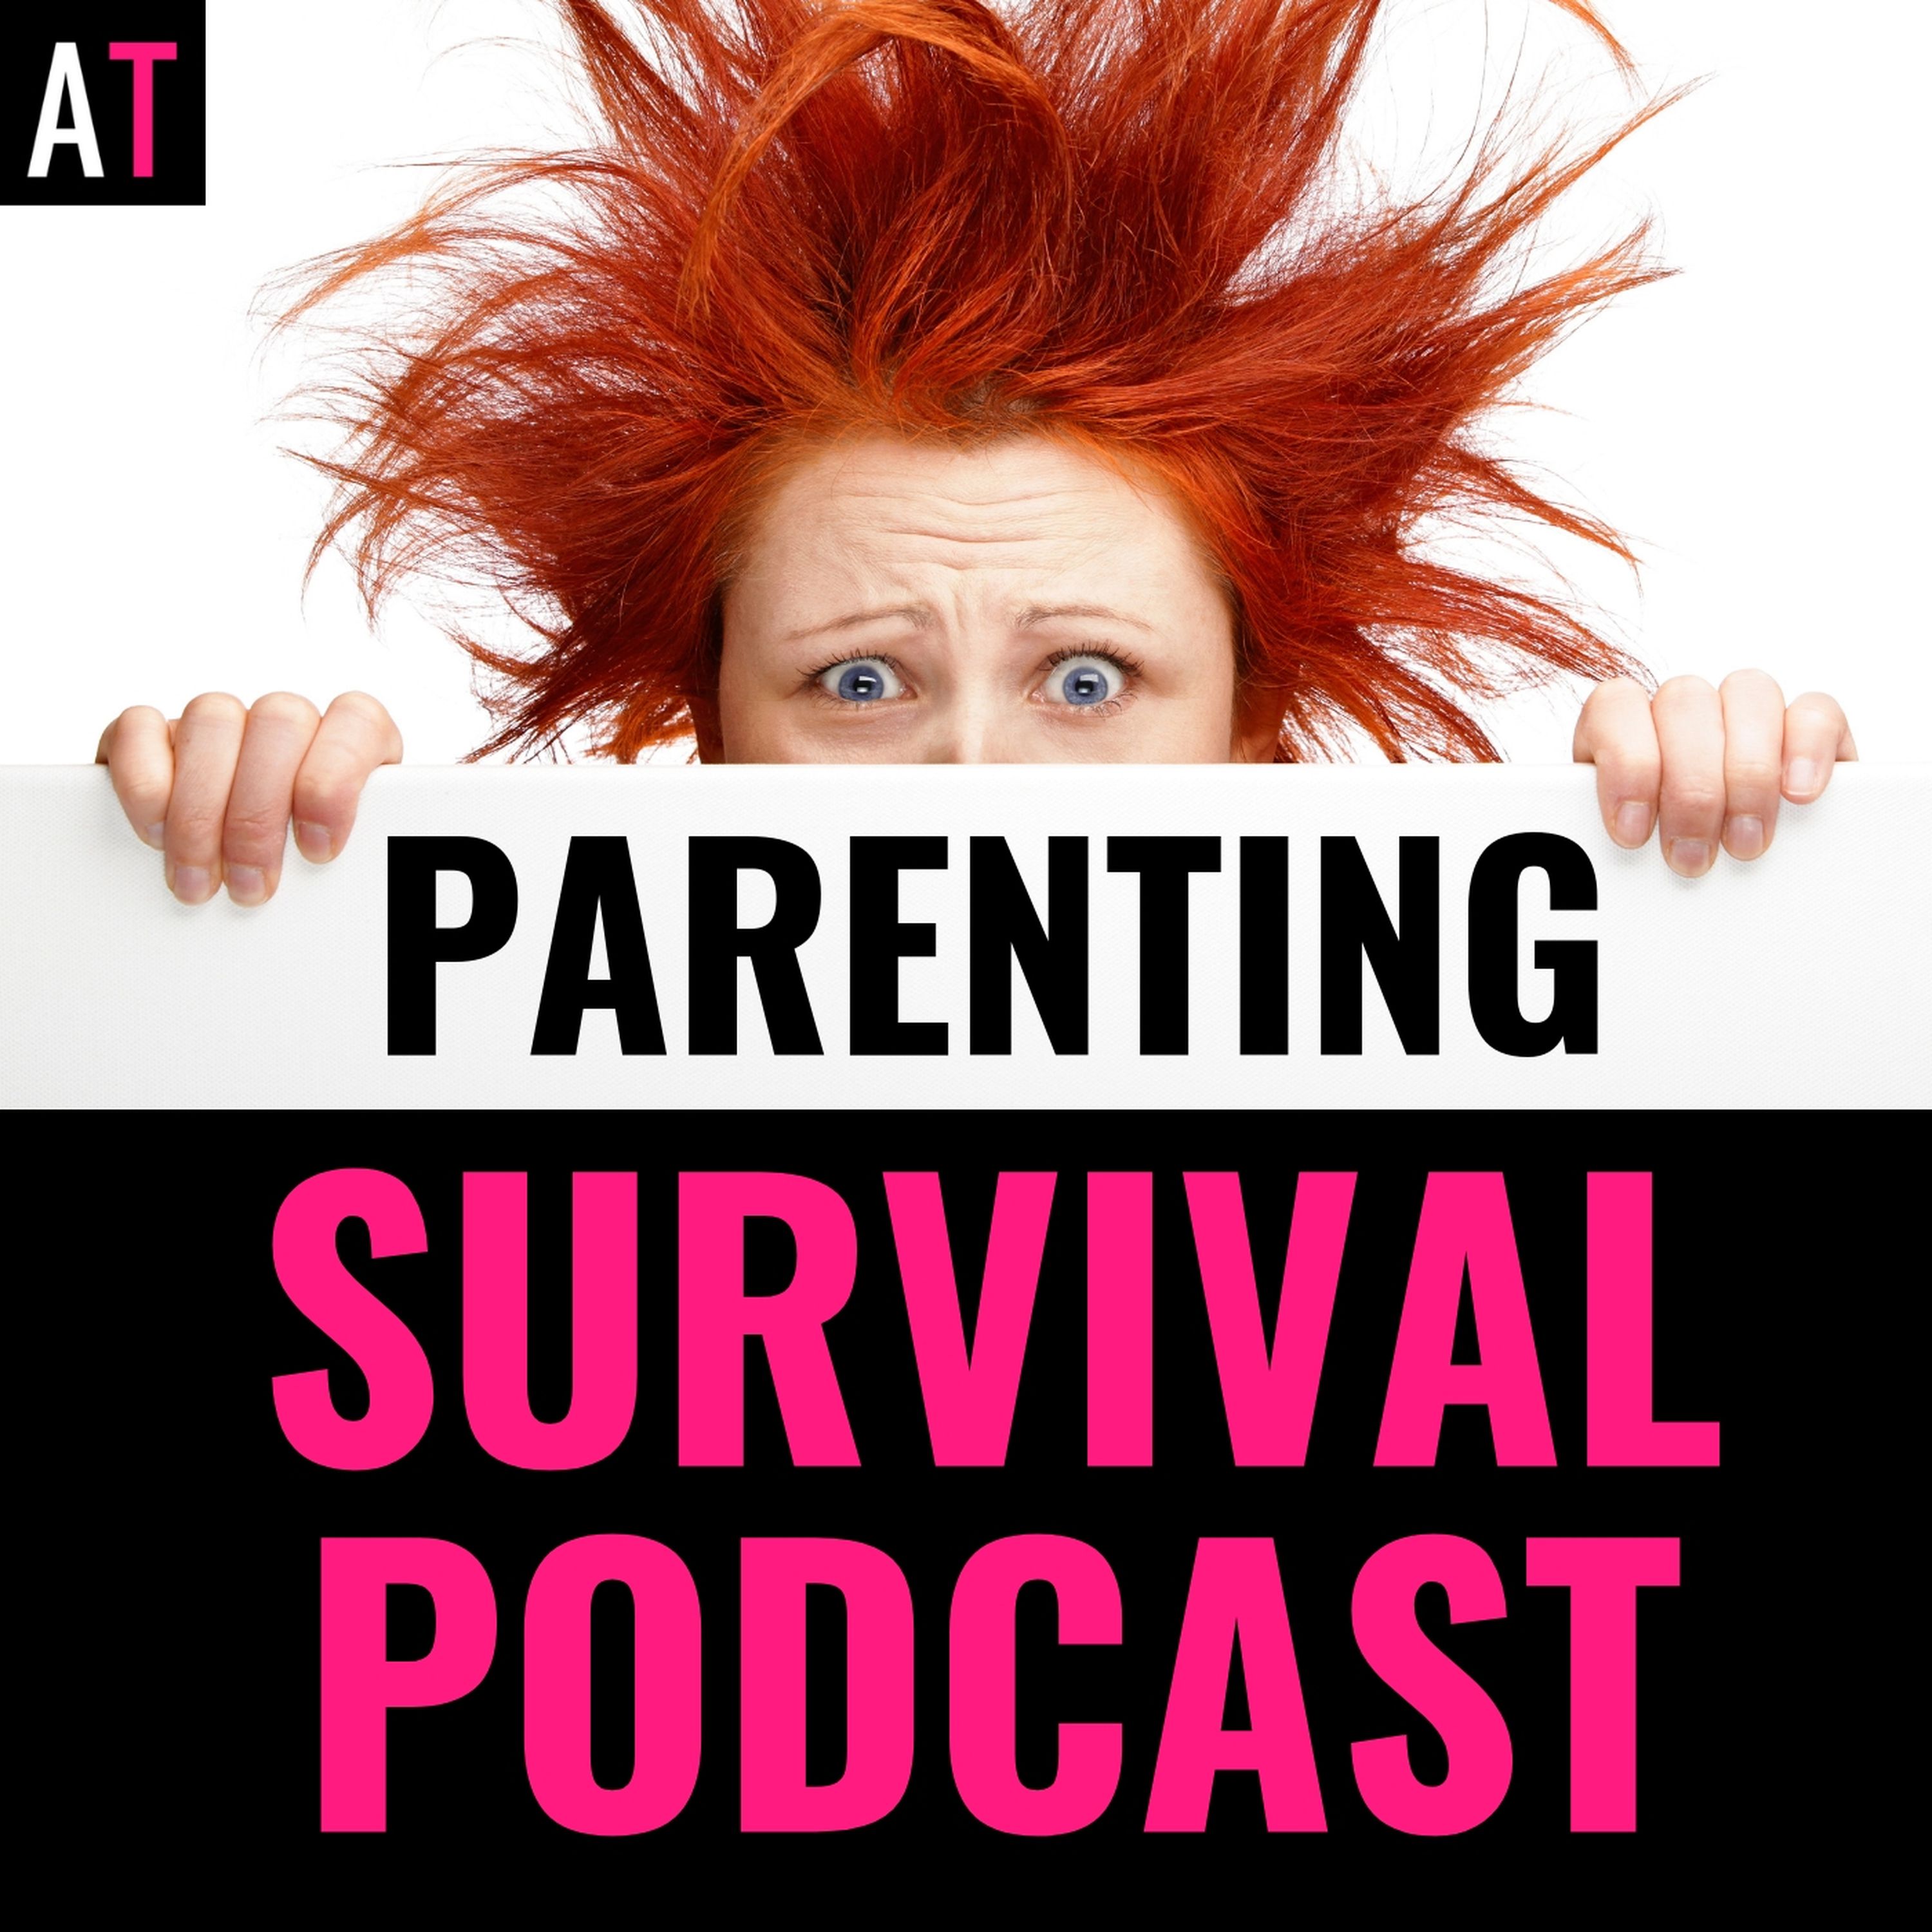 PSP 152: A Mother's Journey to Help Her Daughter and Others with OCD